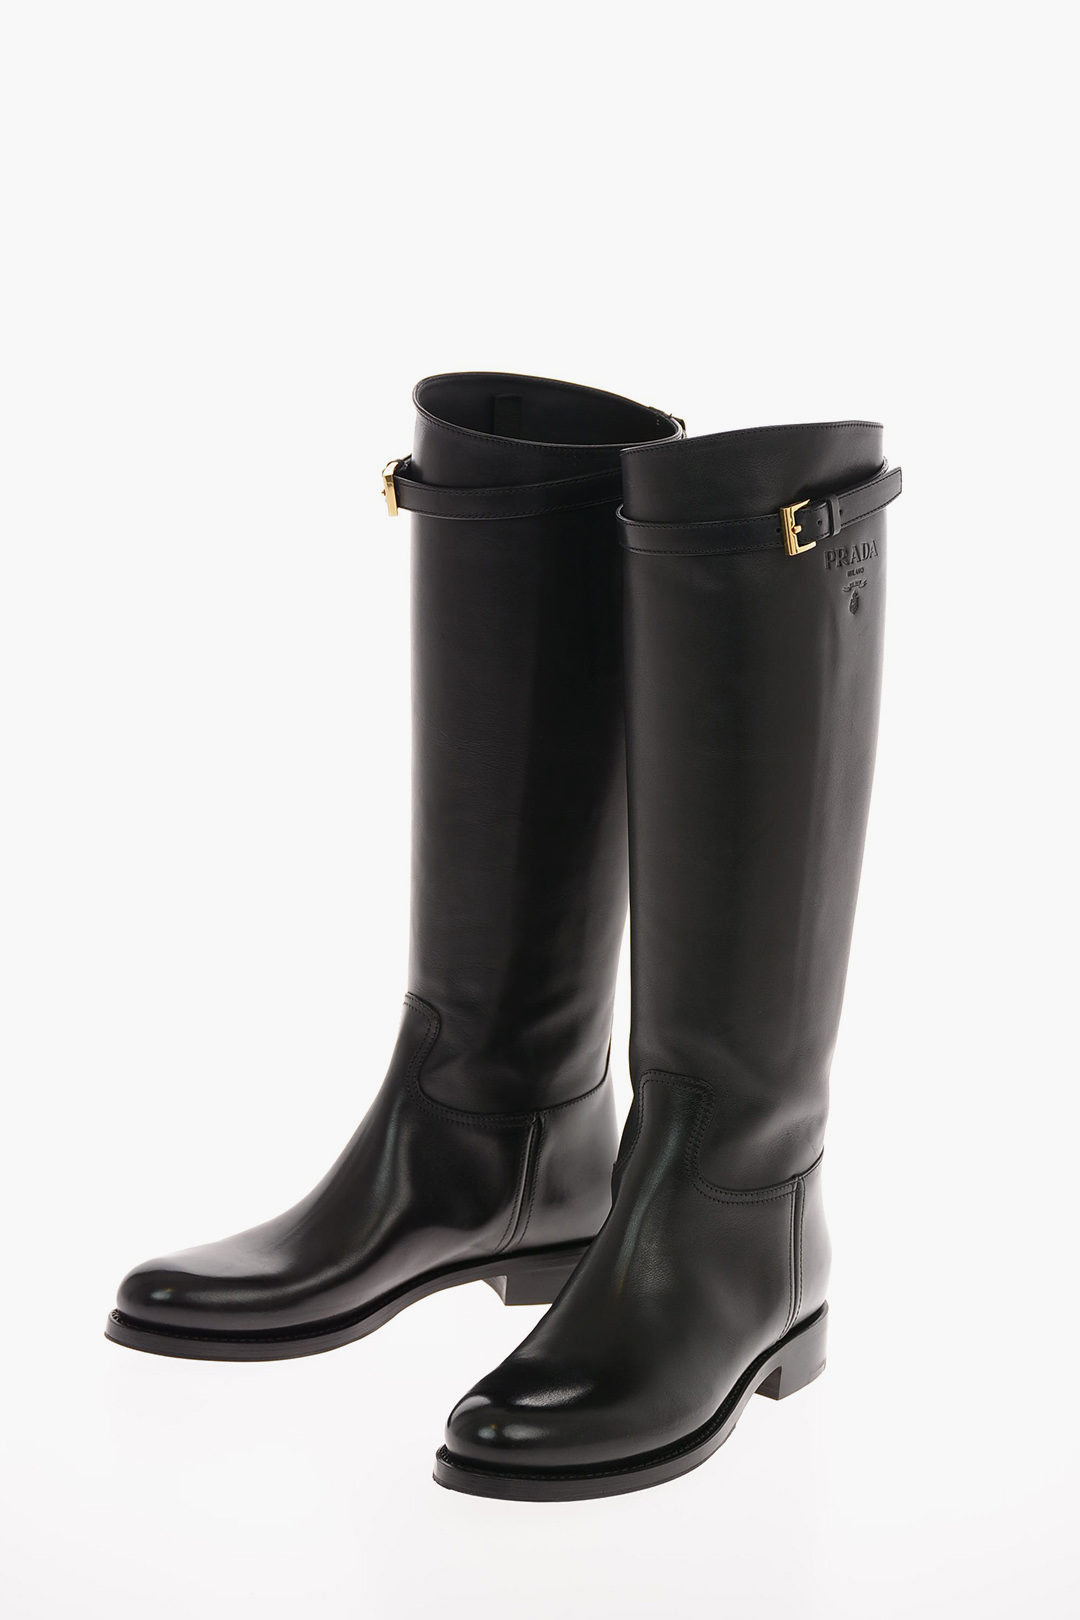 Prada Leather Knee High Boots 5 Cm women - Glamood Outlet